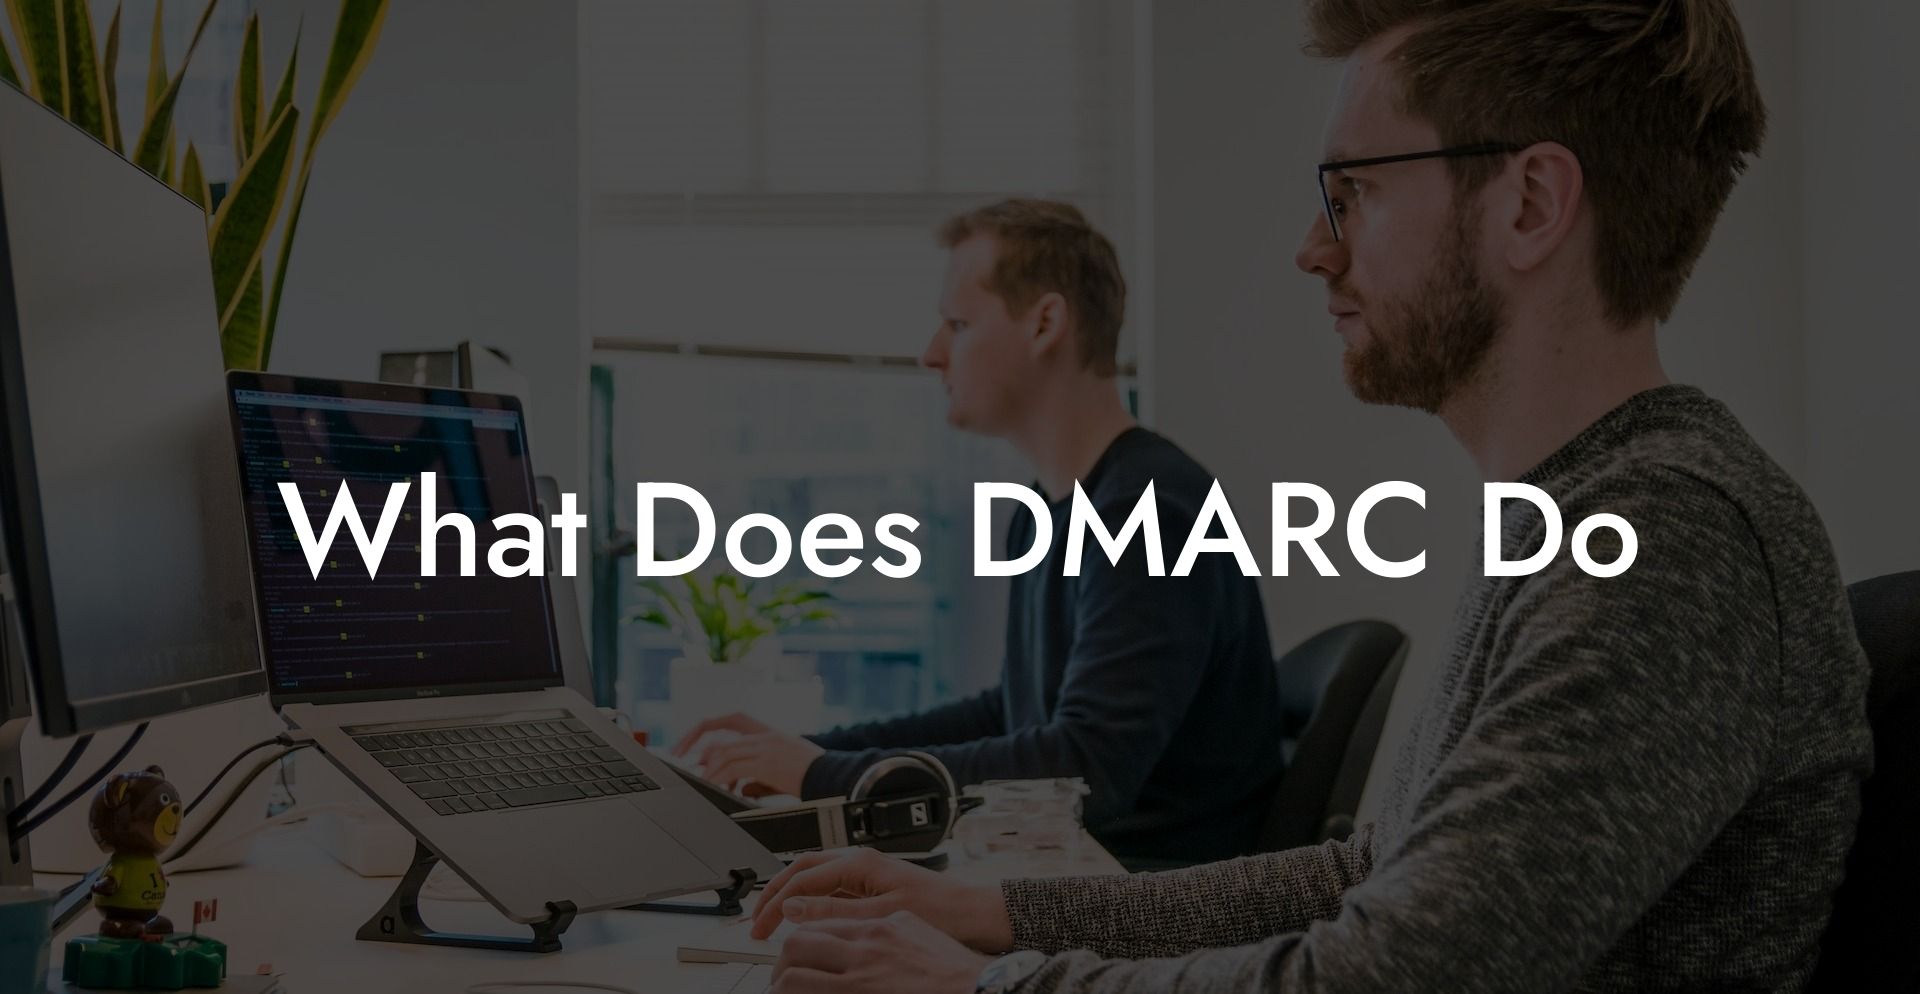 What Does DMARC Do